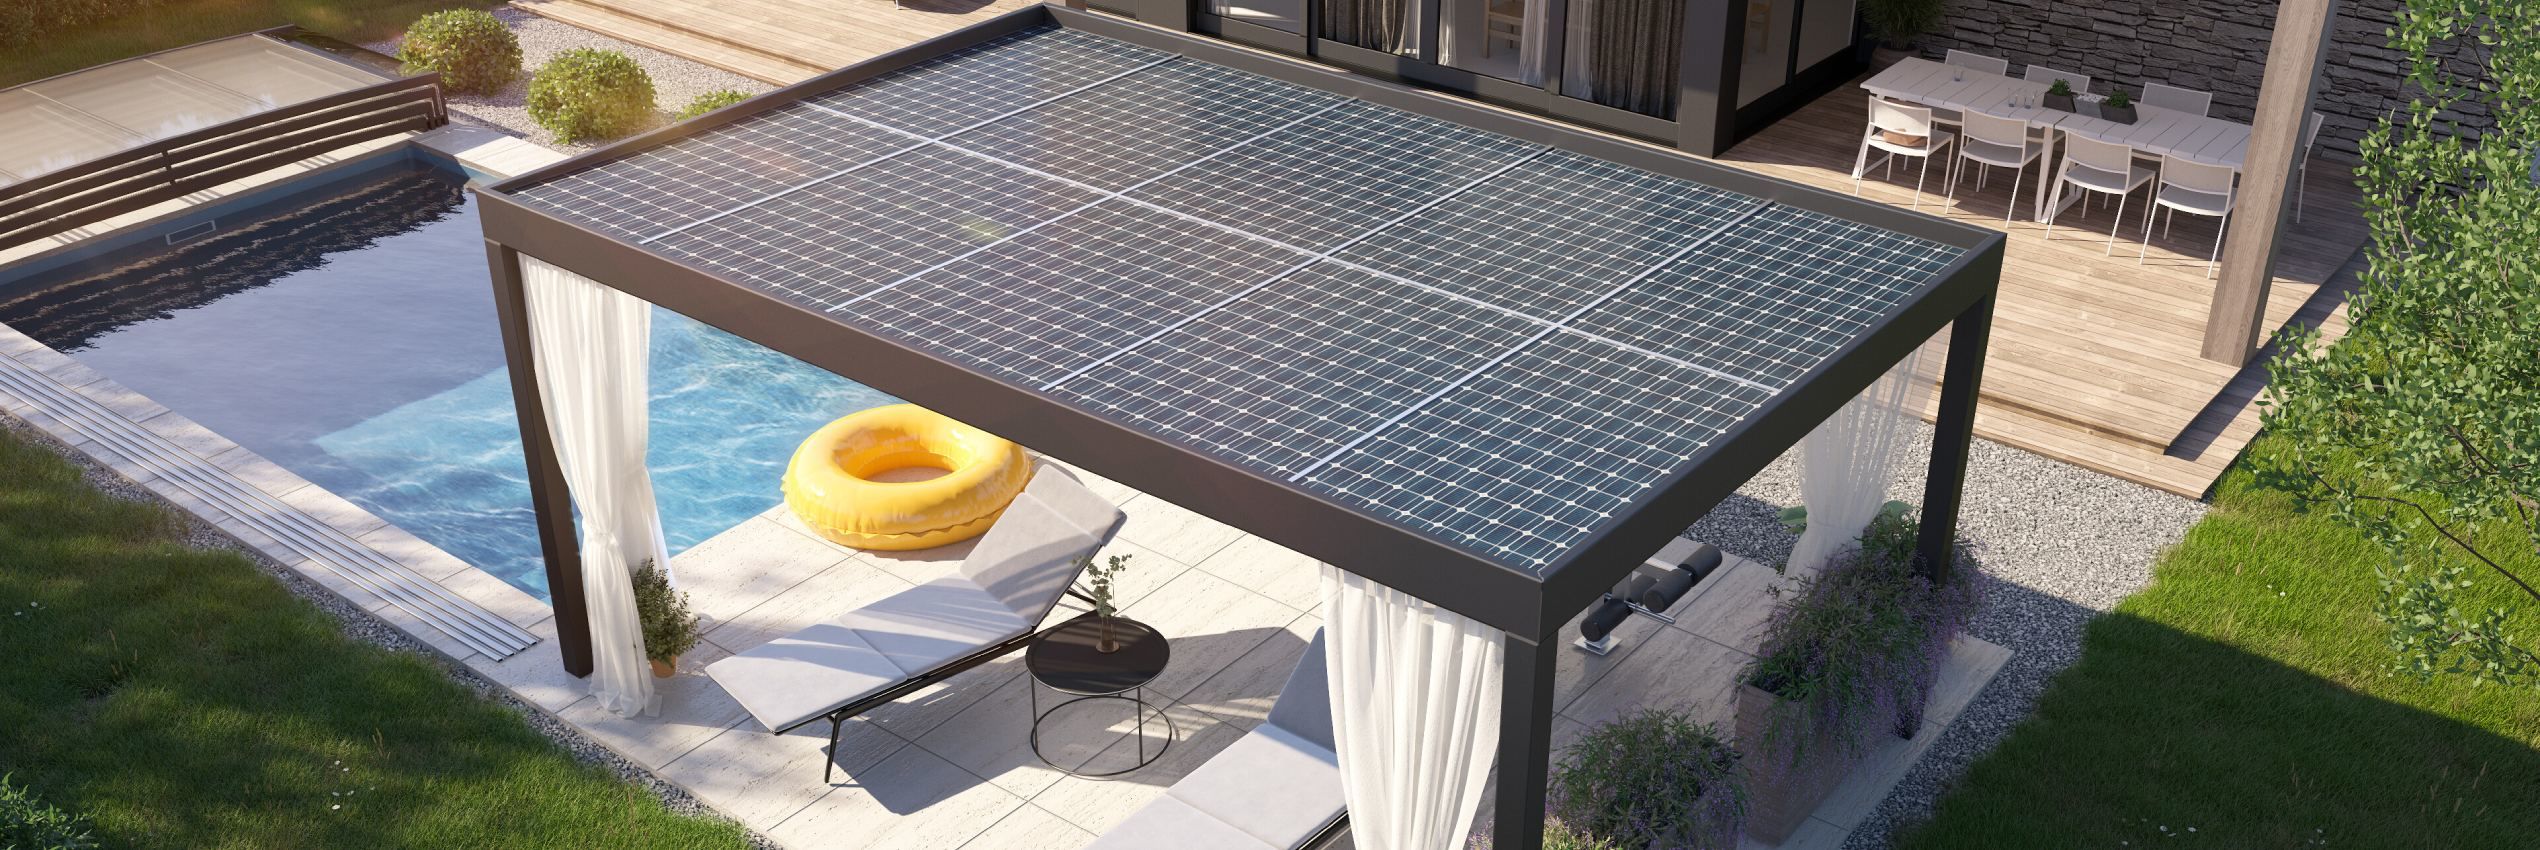 Pergola Solar ENERGY SOURCE FOR POOL AND HOUSE